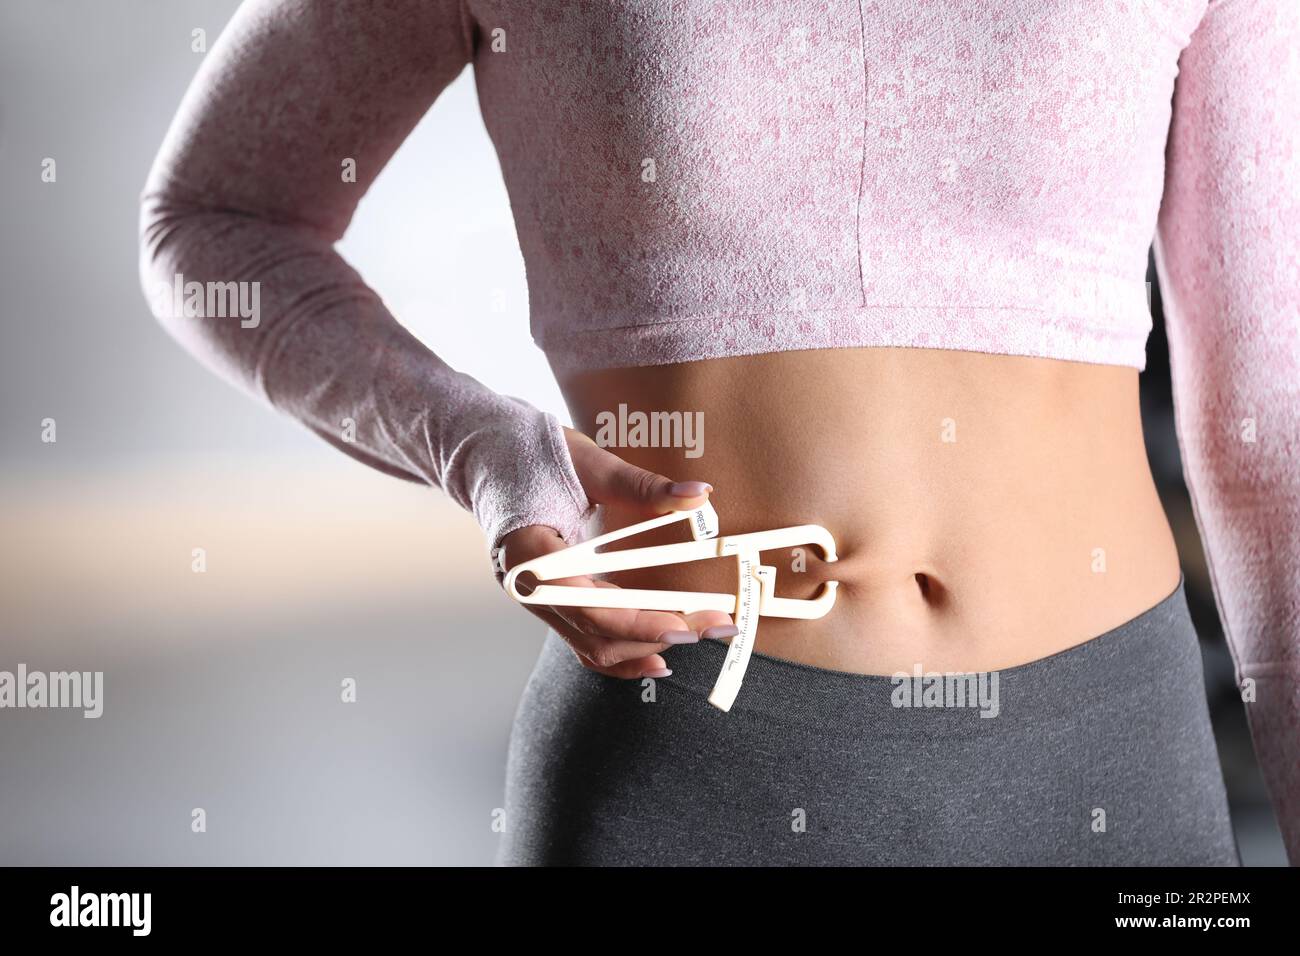 Body fat calipers, woman measuring subcutaneous percentage of fat